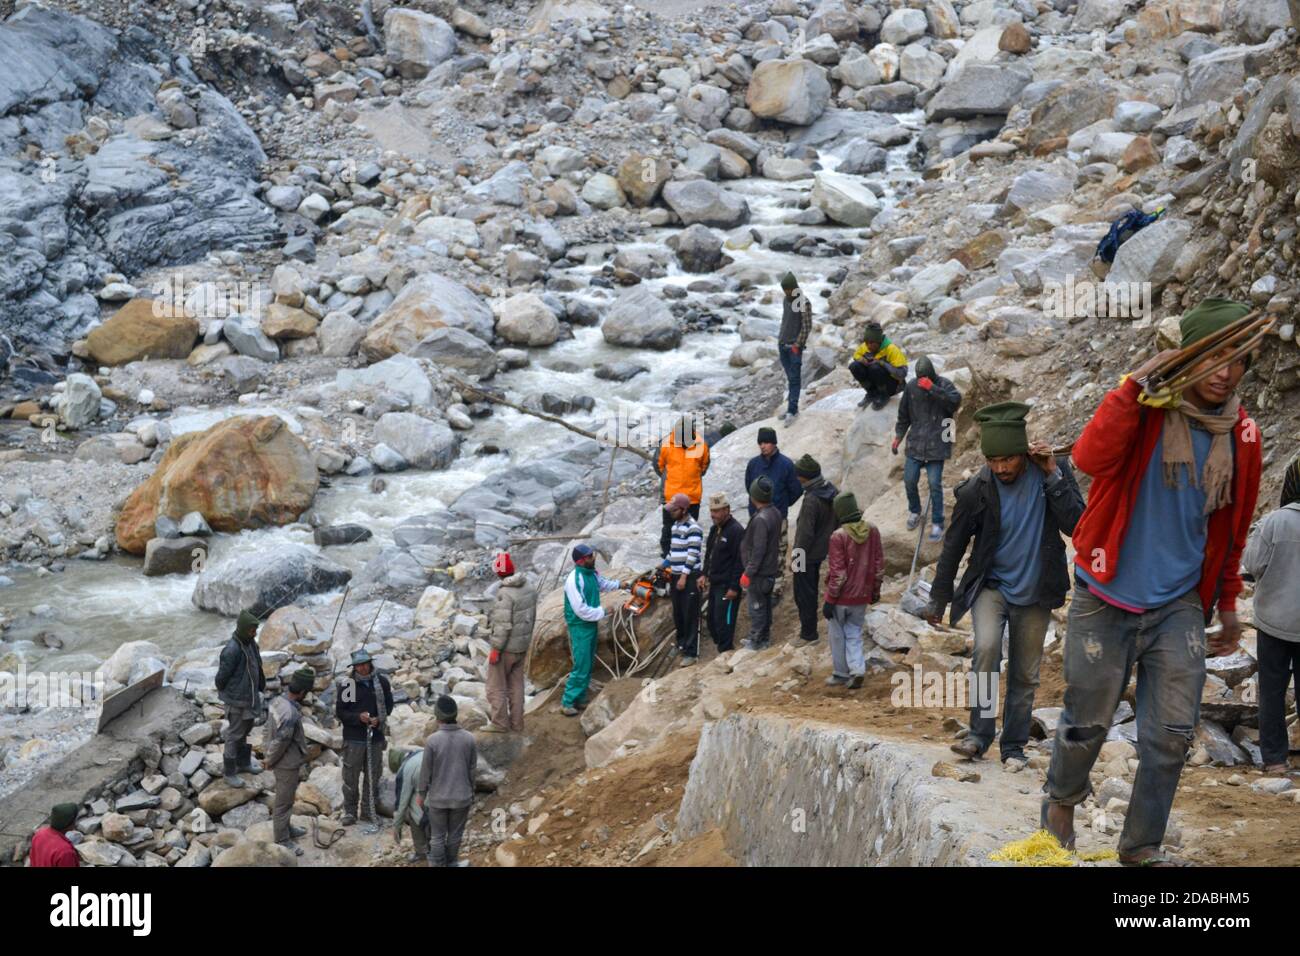 Rudarprayag, Uttarakhand, India, April 26 2014, Labor working for Kedarnath reconstruction after disaster. Portions of the Himalayan shrine in Uttarakhand were damaged in flash floods in 2013, after which the reconstruction work start.  Stock Photo